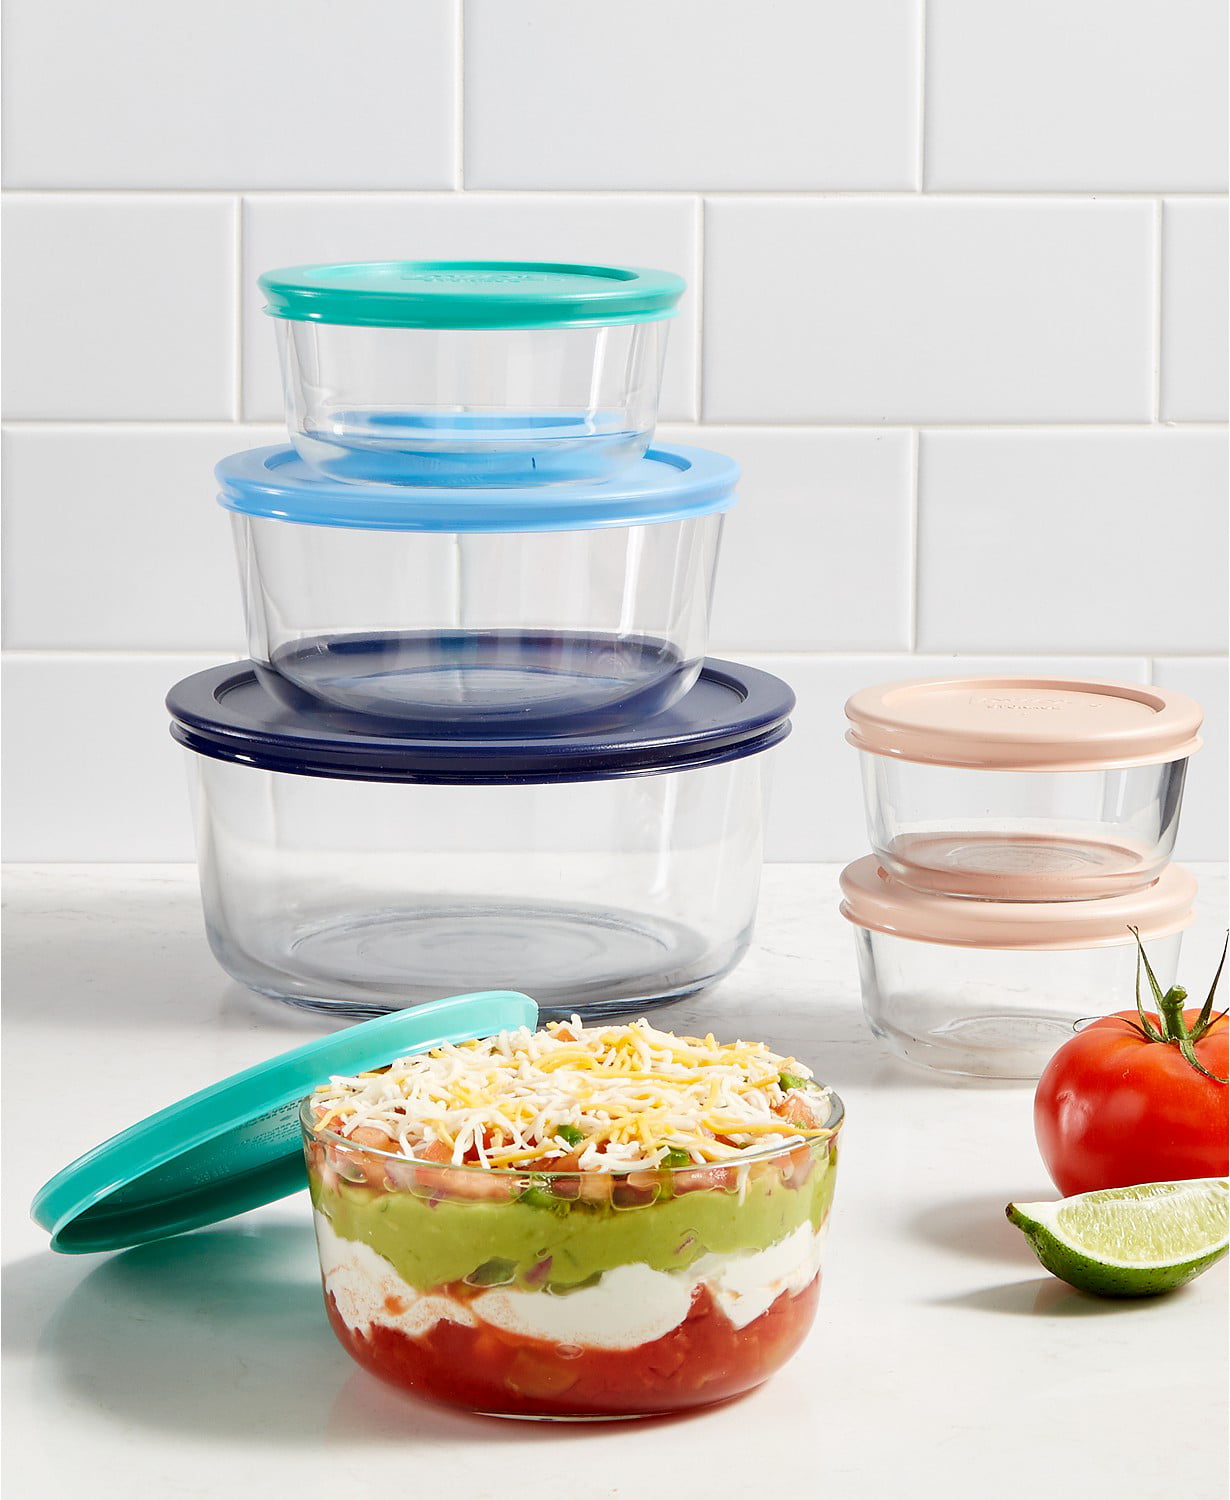 Pyrex Simply Store Meal Prep Glass Food Storage Containers 18-Piece Set, BPA Free Lids, Oven Safe, Multicolored (New Open Box)